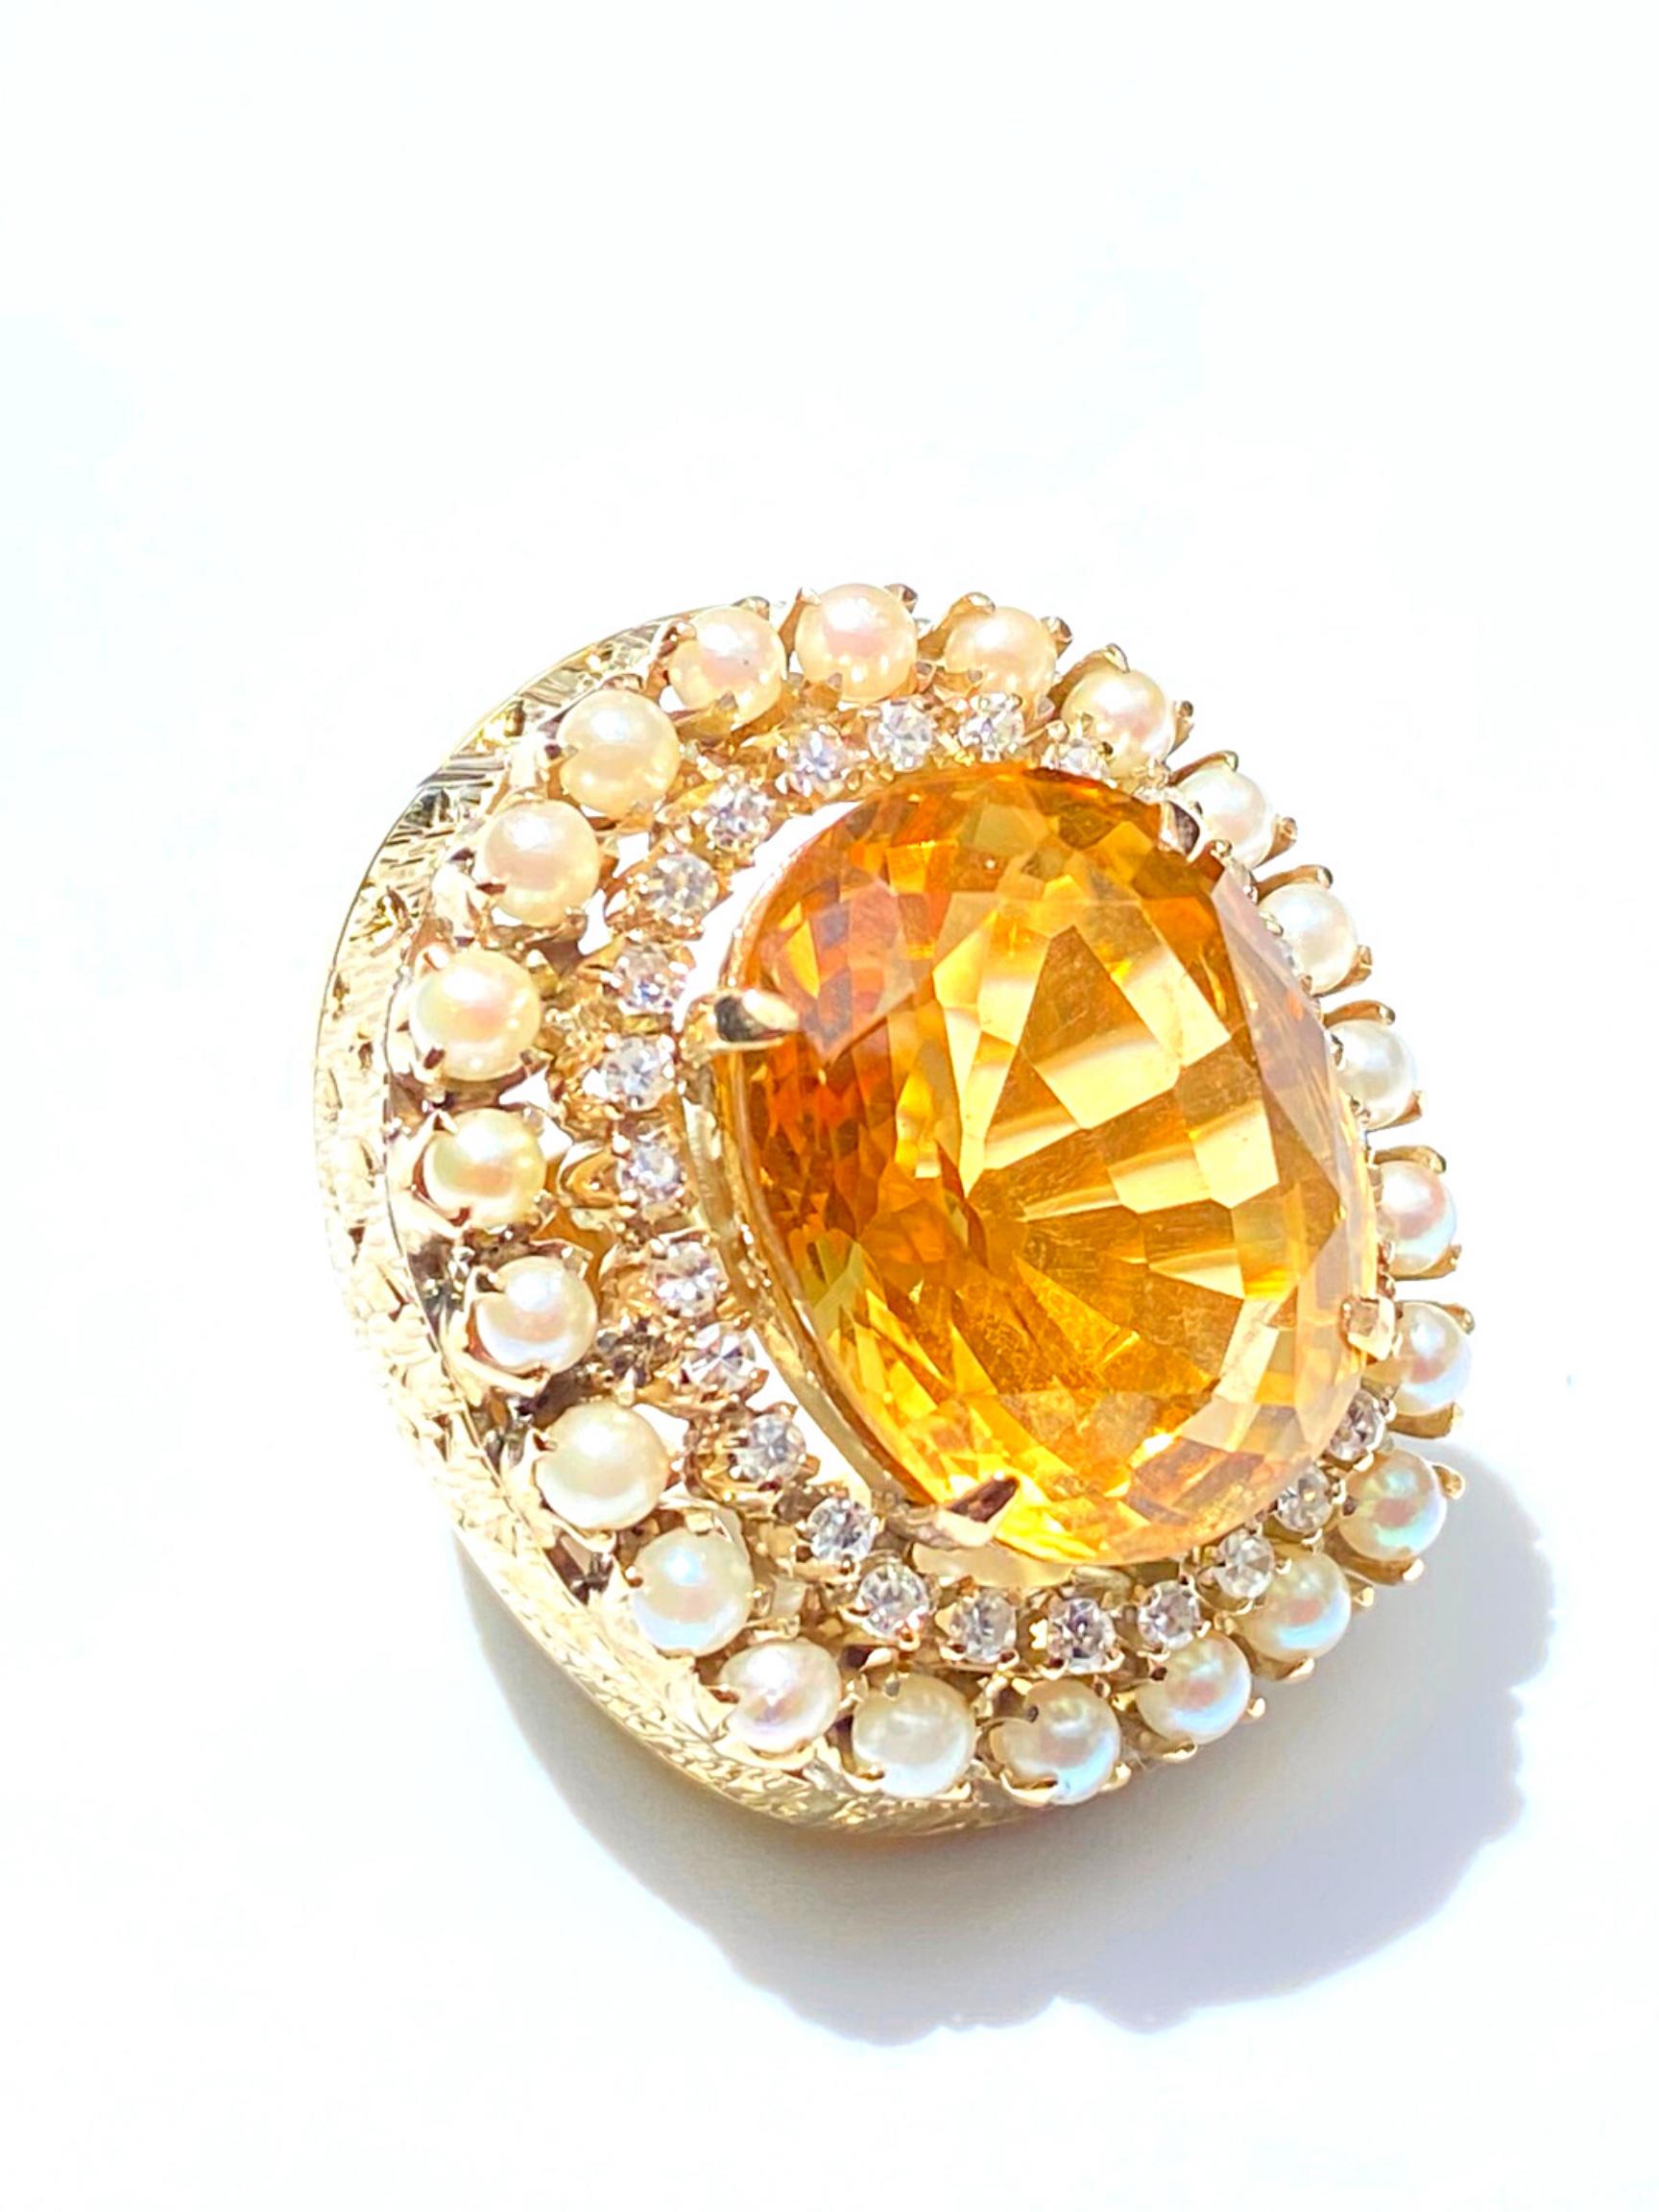 Centering a lovely Vivid Orange ~25 Carat Oval-Cut Citrine, framed by 27 Round-Brilliant Cut Diamonds and 22 